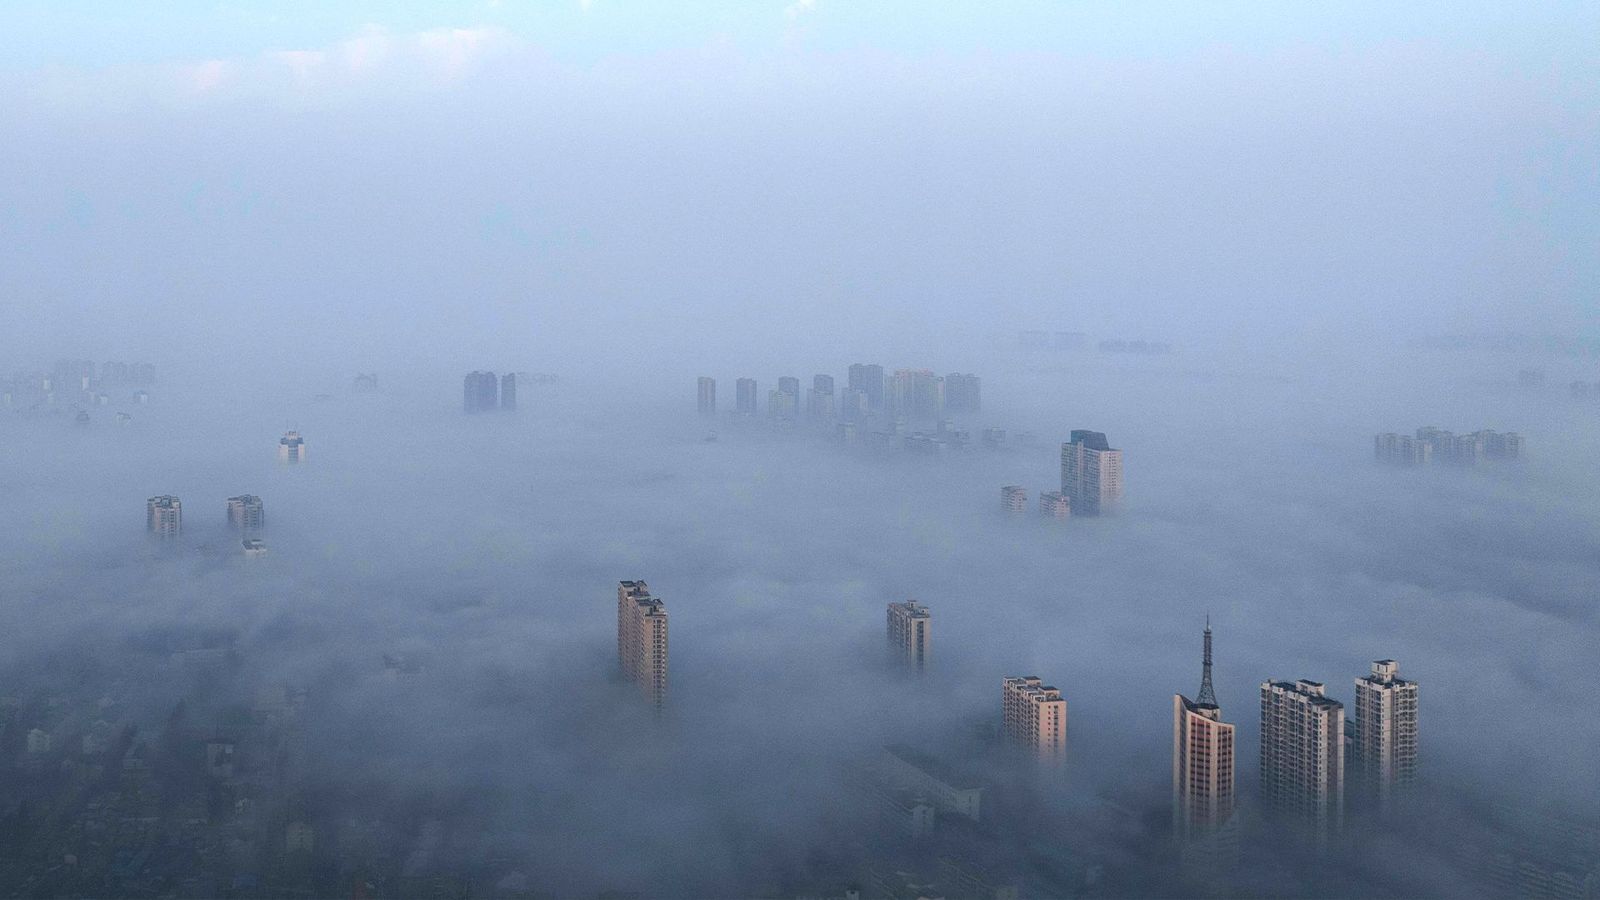 Smog over Huaian, China (credit: Getty images)